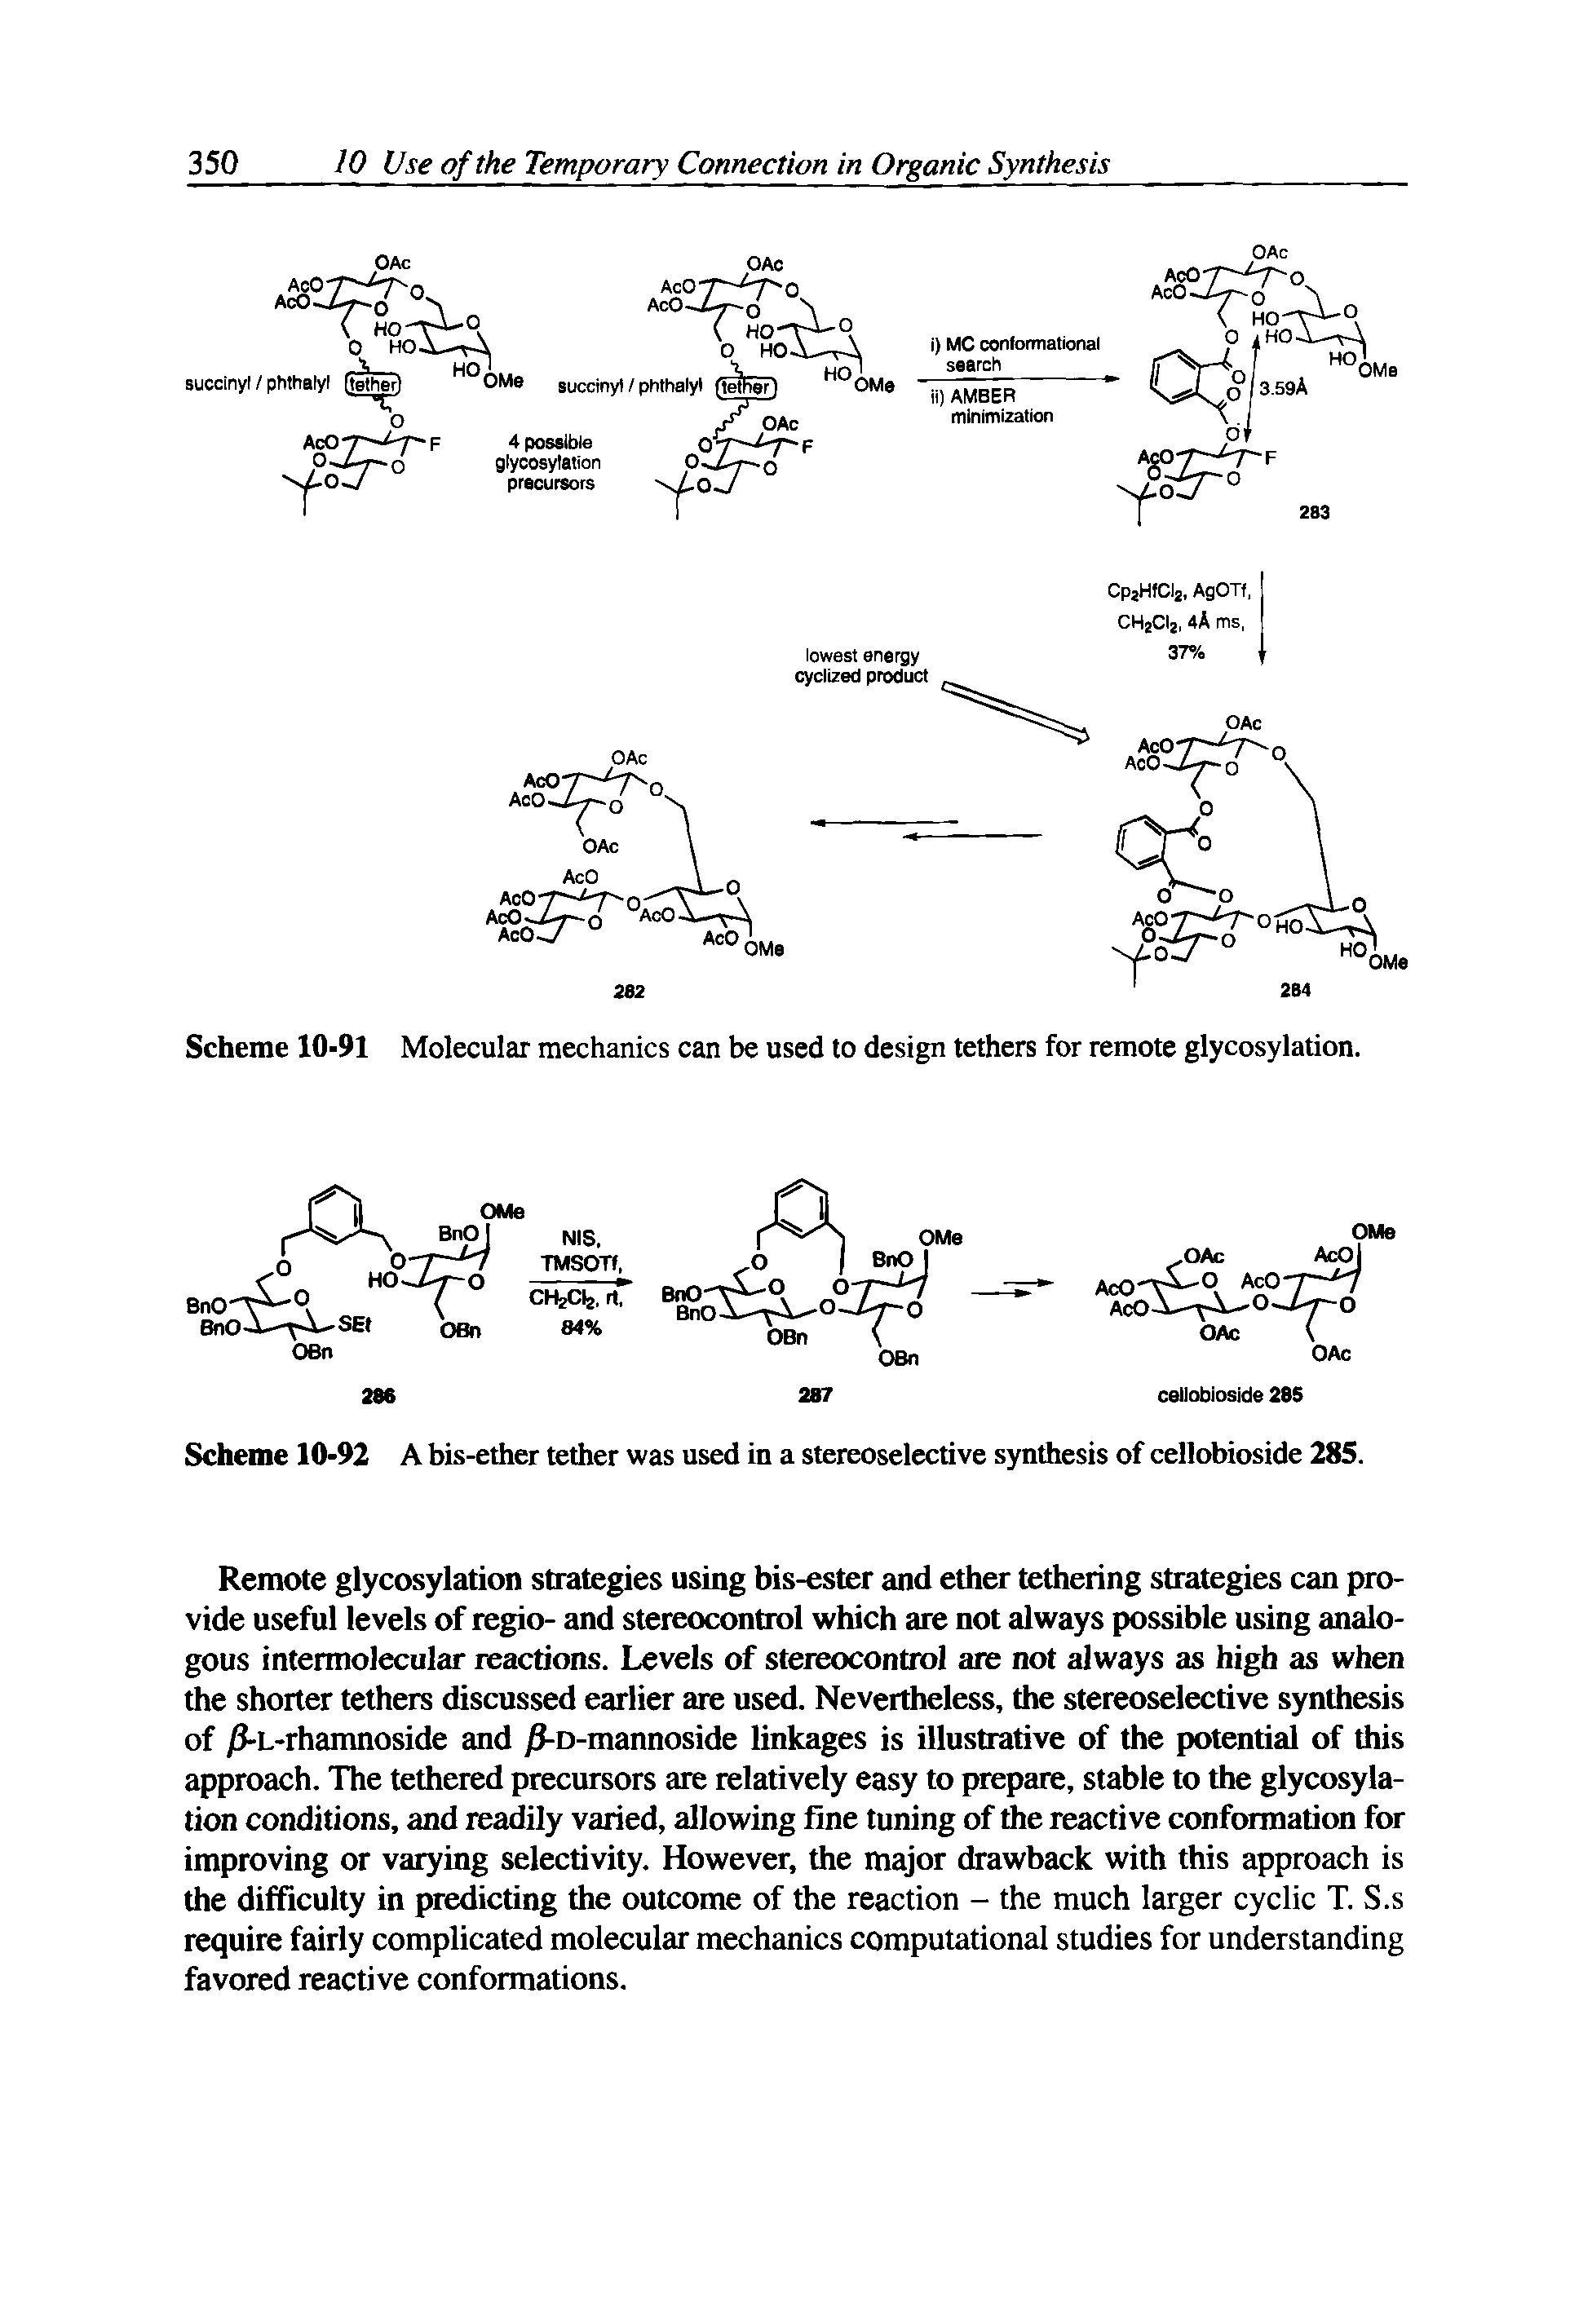 Scheme 10-92 A bis-ether tether was used in a stereoselective synthesis of cellobioside 285.